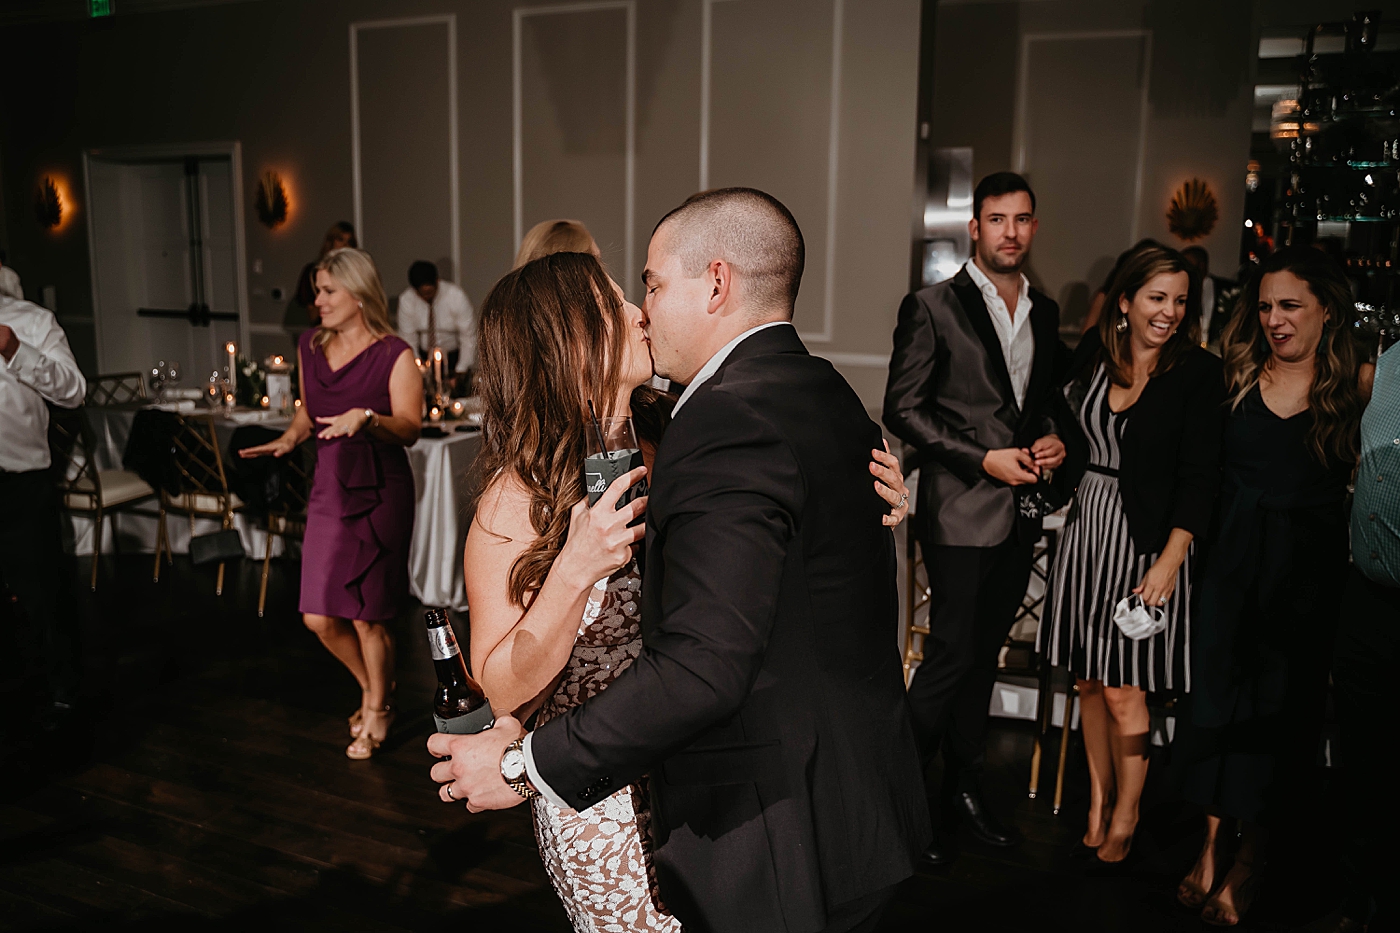 Romantic Wedding During COVID-19 captured by West Palm Beach Wedding Photographer, Krystal Capone Photography